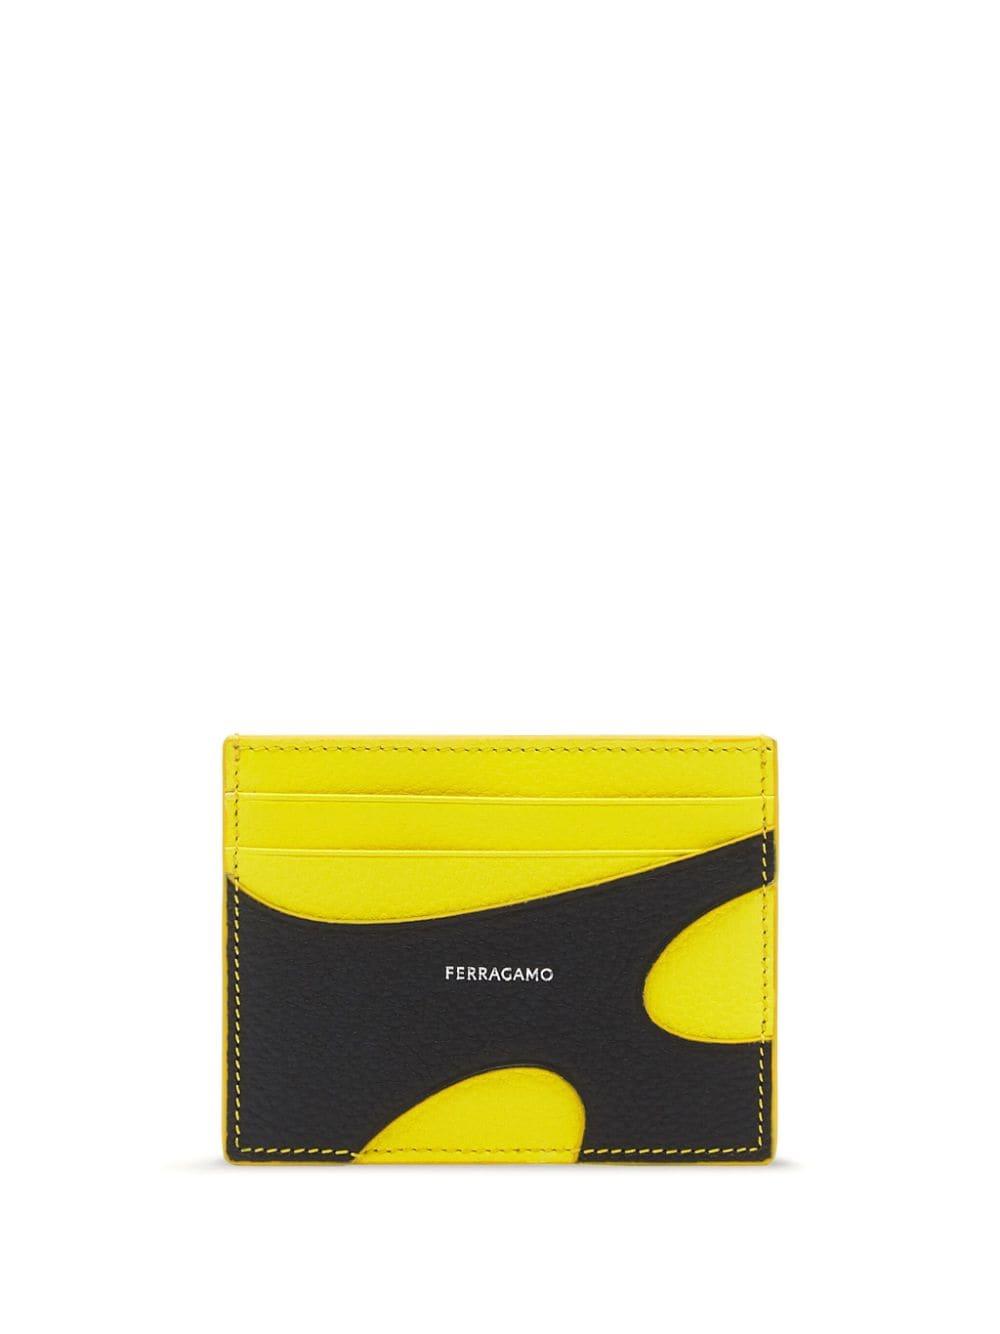 Ferragamo Cut-out Detail Leather Cardholder in Yellow for Men | Lyst